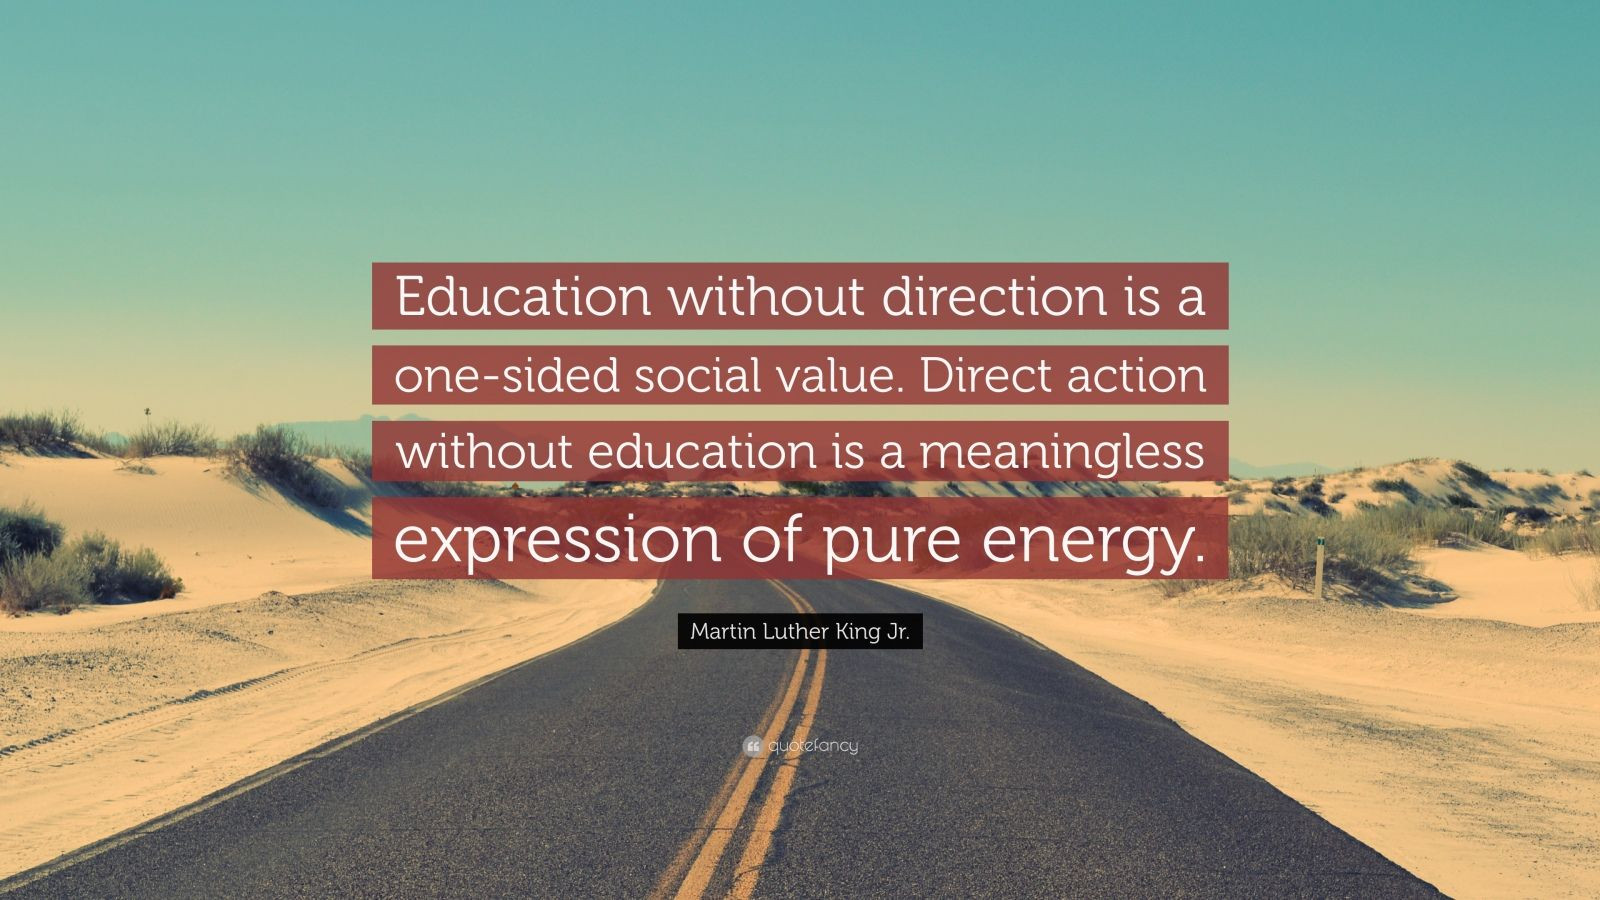 Martin Luther King Education Quote
 Martin Luther King Jr Quote “Education without direction